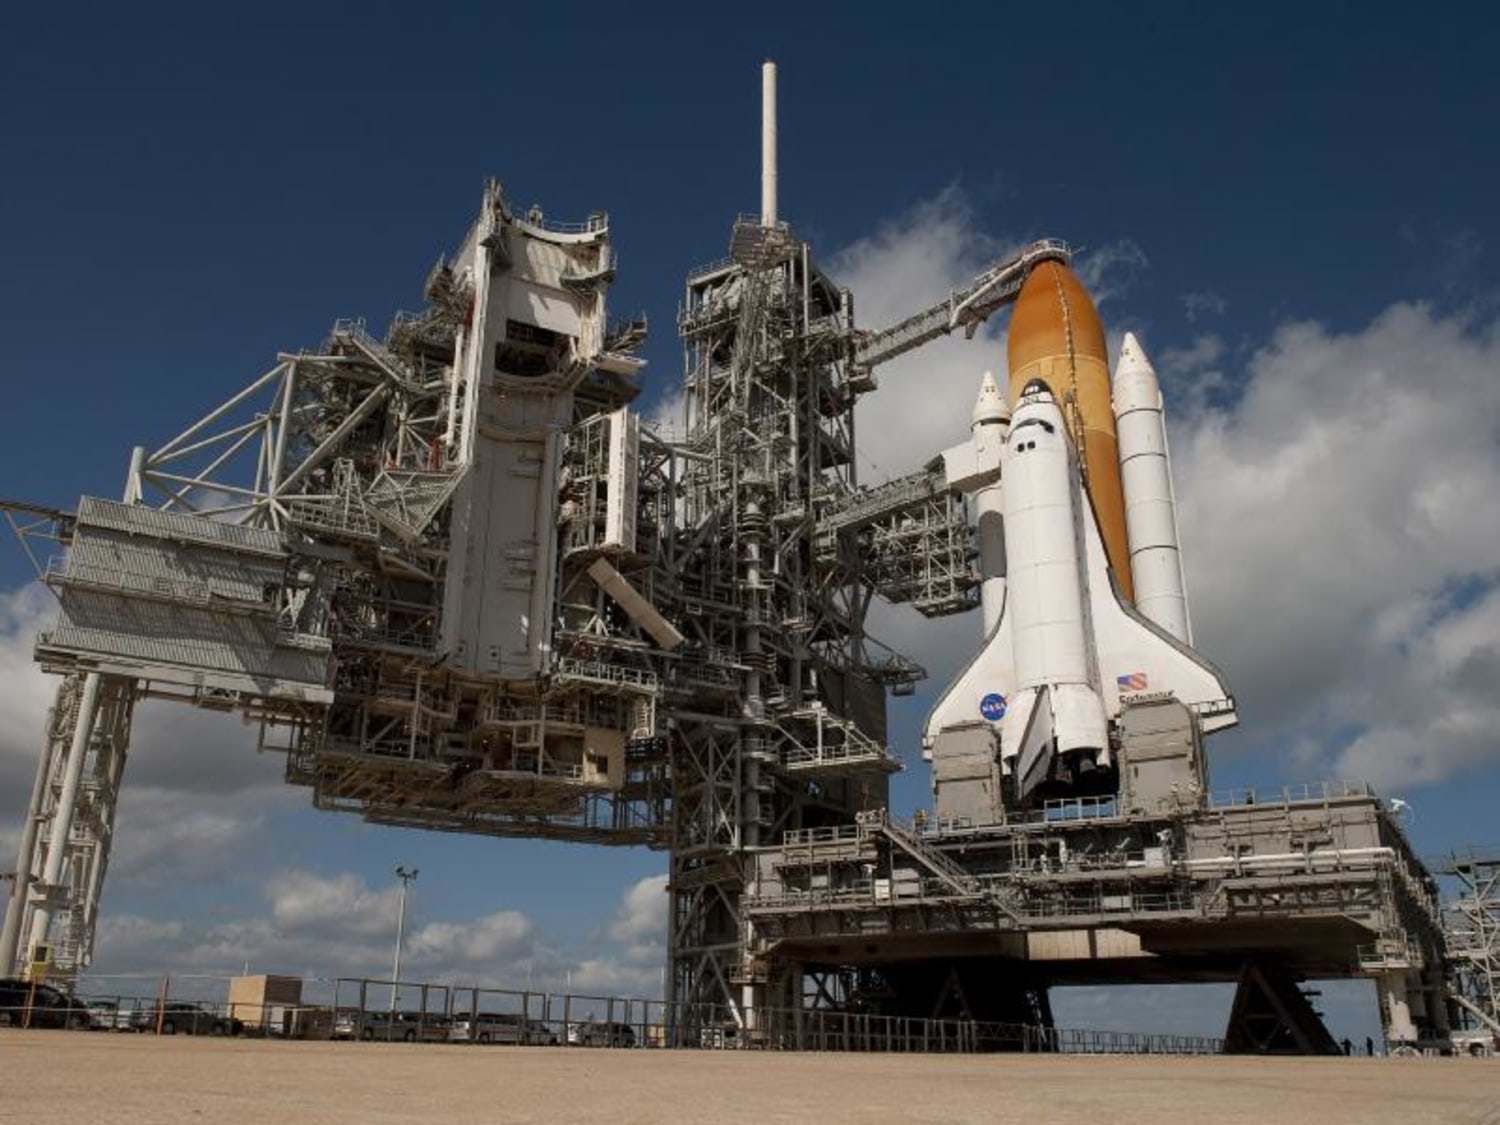 SpaceX wins NASA's nod to take over historic Launch Pad 39A